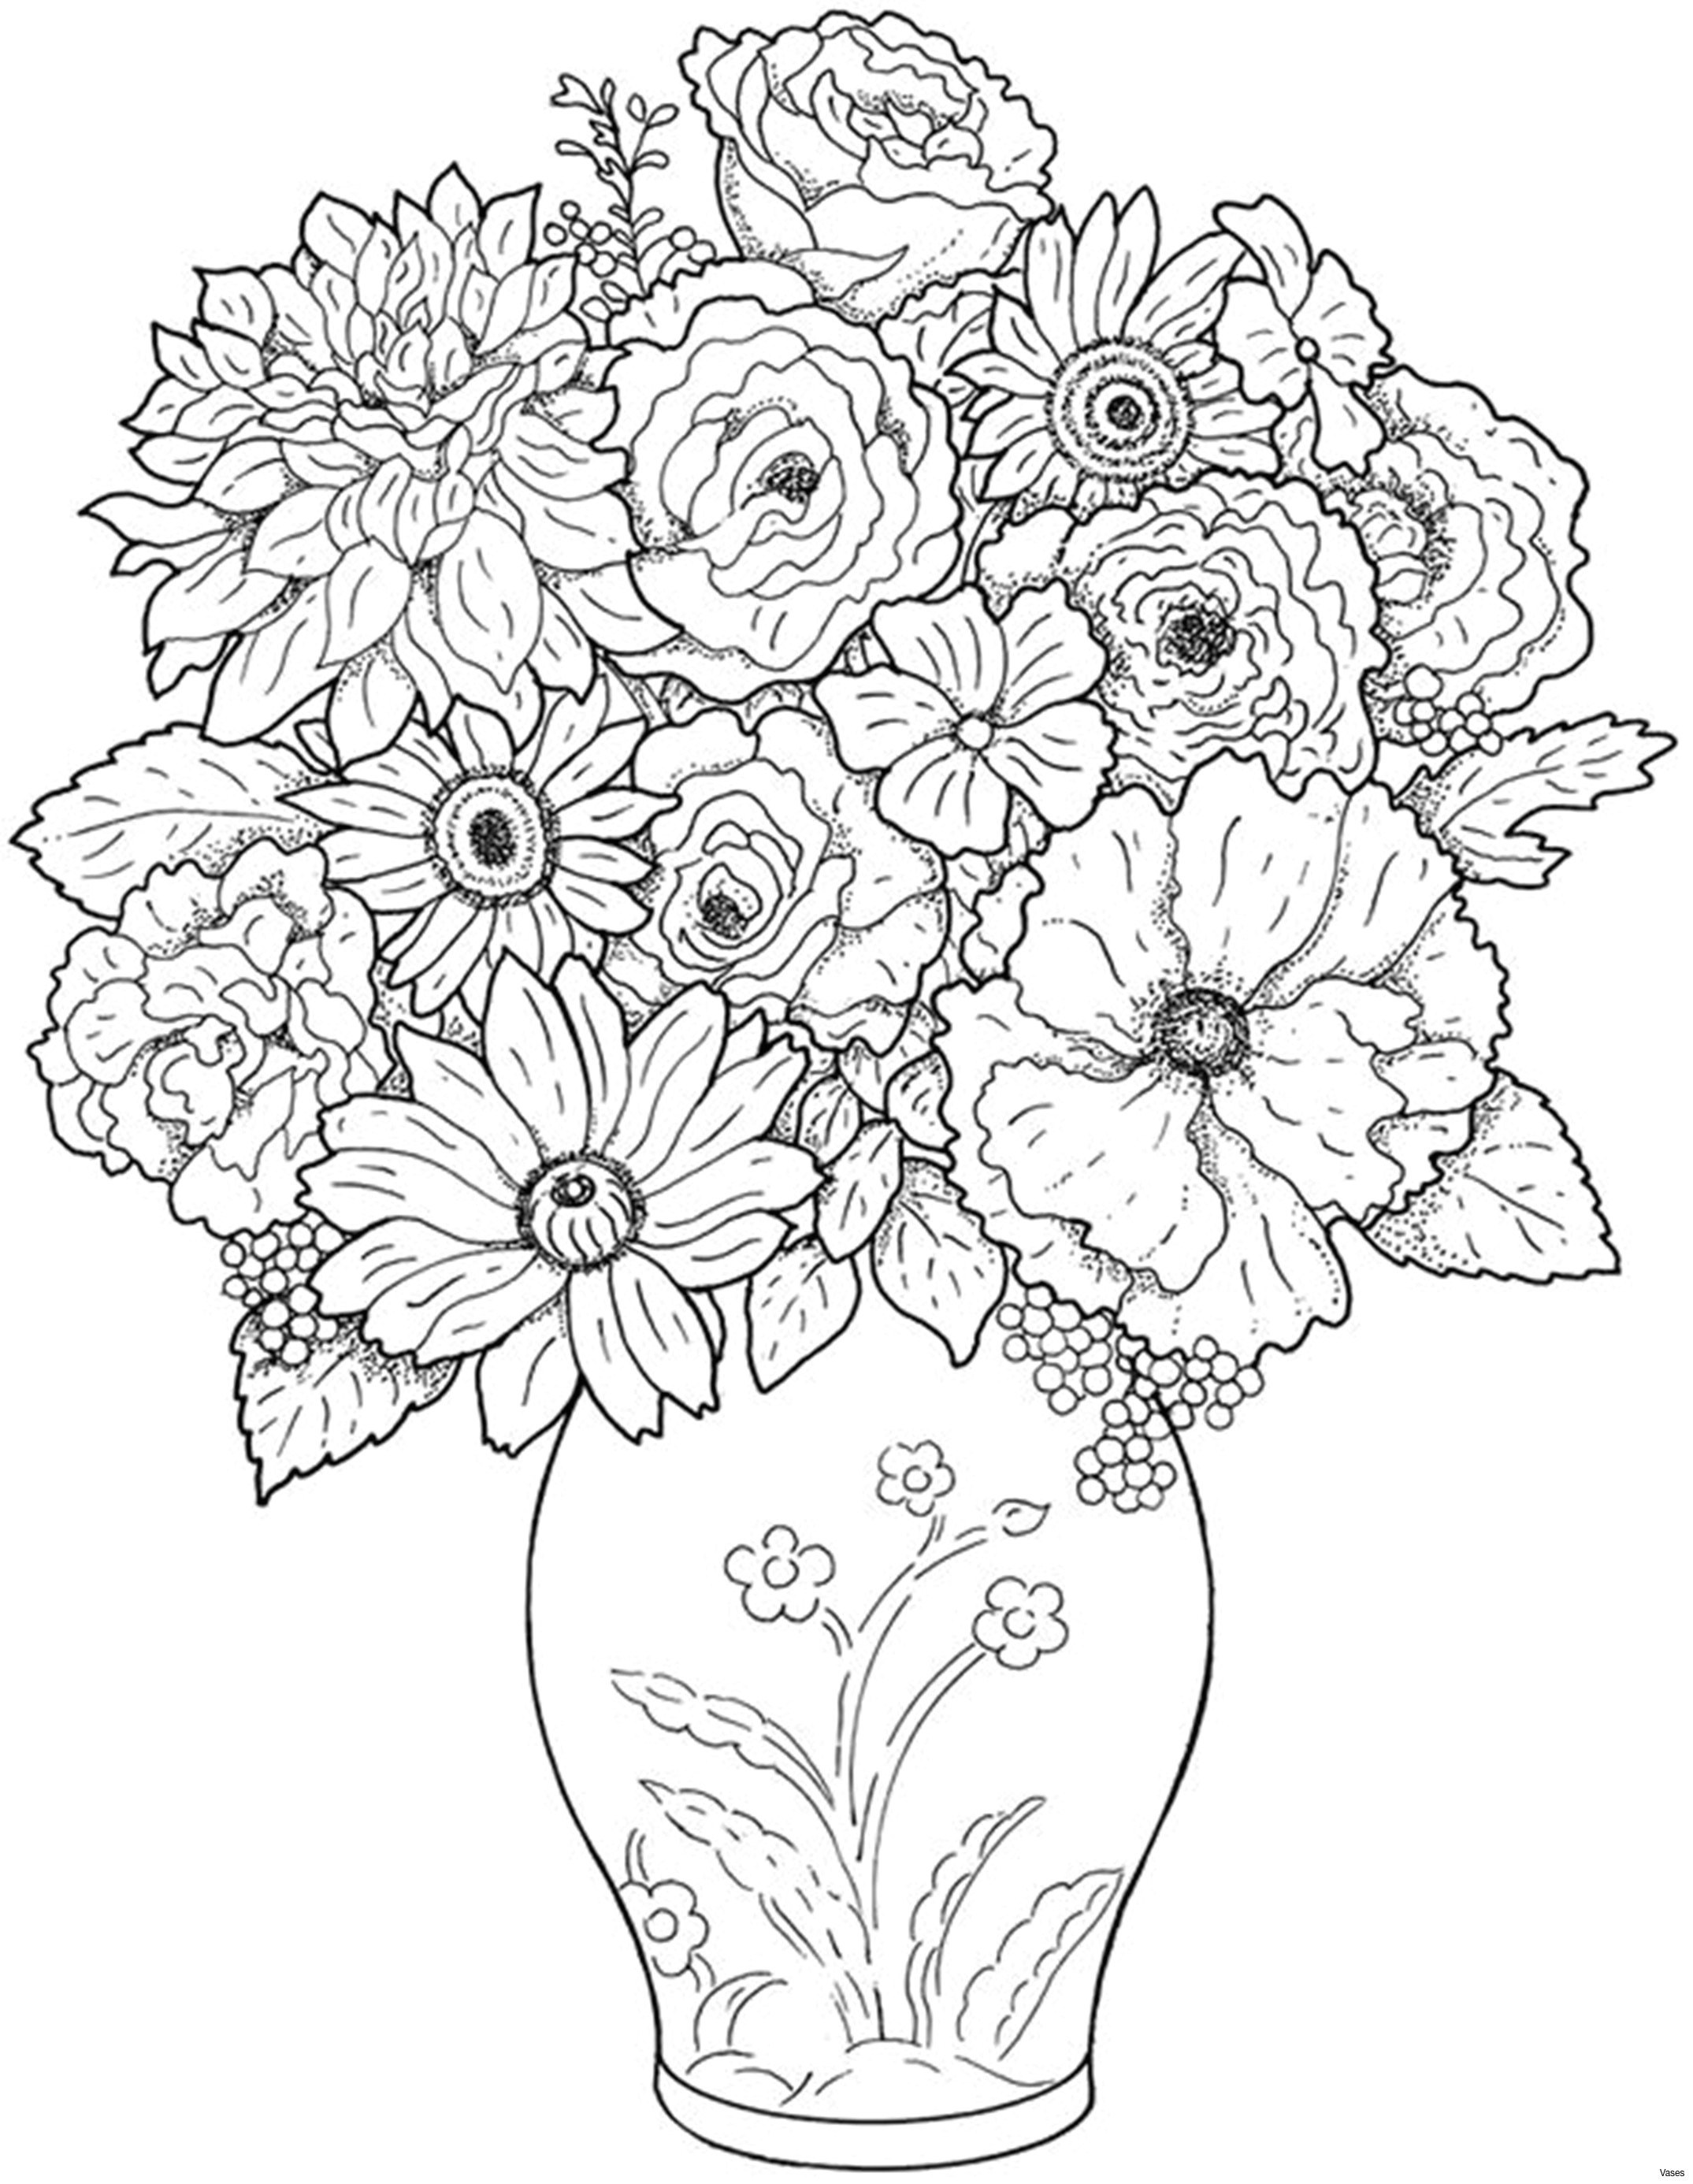 Drawing Pictures Of Flowers for Colouring Www Colouring Pages Aua Ergewohnliche Cool Vases Flower Vase Coloring